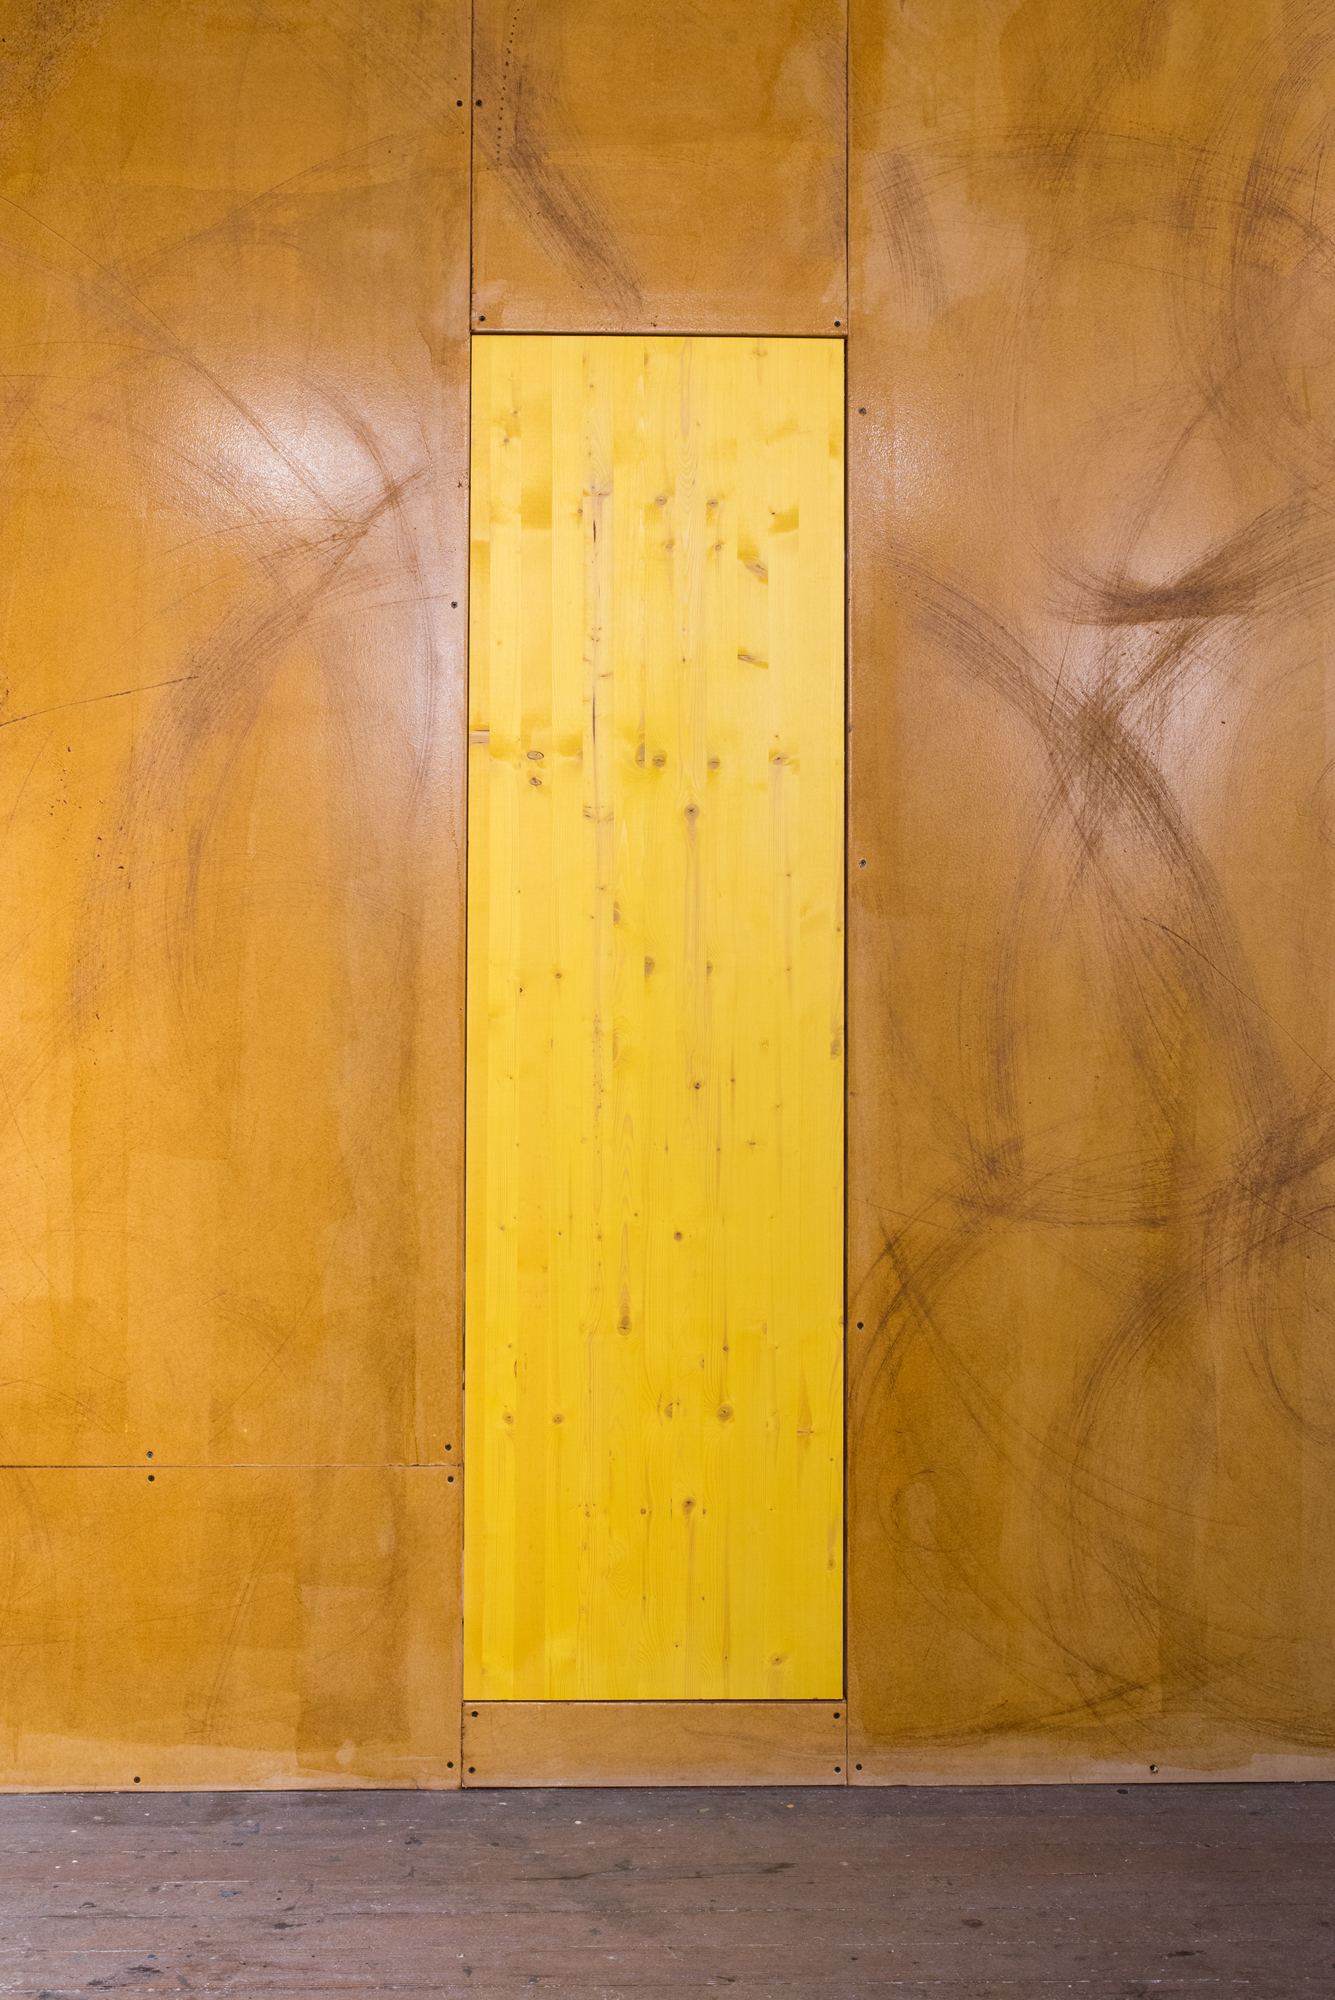  Gabriel Sierra, Trapdoor for Contadina, 2019. Wood plank, yellow stain, 72 x 20 x 1.5 inches. Courtesy of the artist and Kurimanzutto, Mexico; Photo: Preston/Kalogiros; Courtesy of The 500 Capp Street Foundation. 